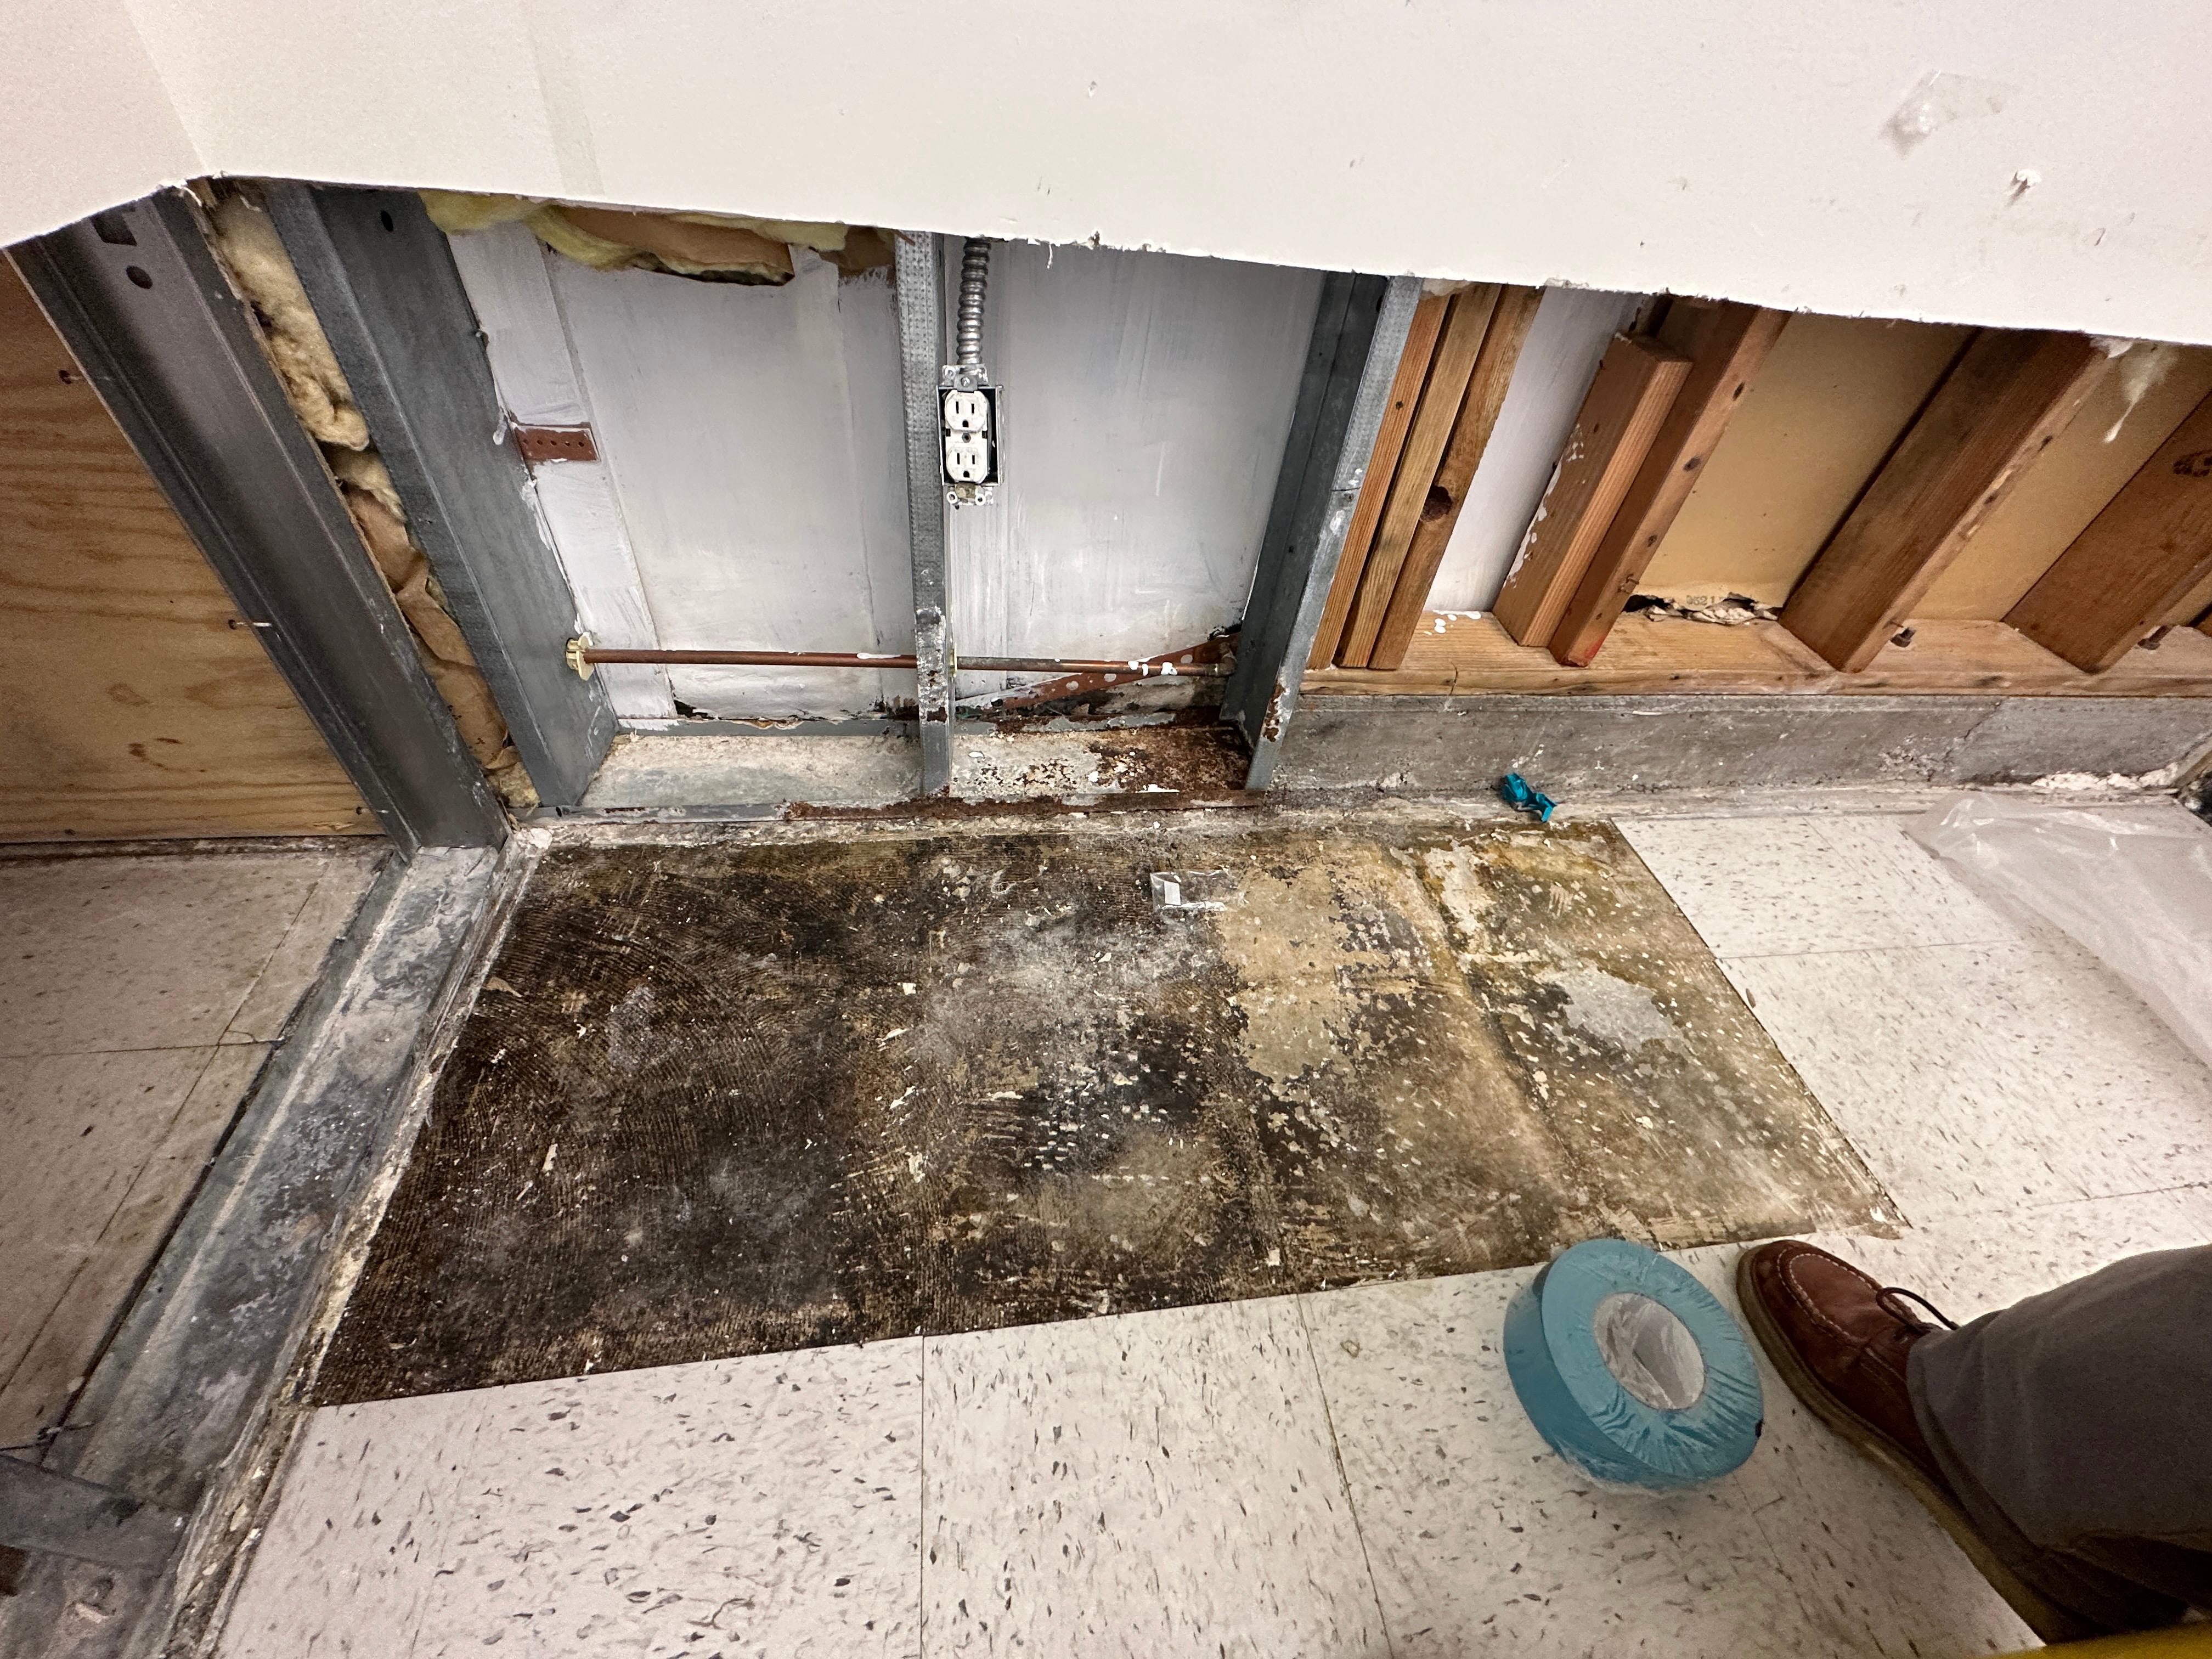 Trust the professionals at SERVPRO of Laguna Beach/ Dana Point for fast, safe, and reliable mold damage restoration services. Give us a call for professional help!